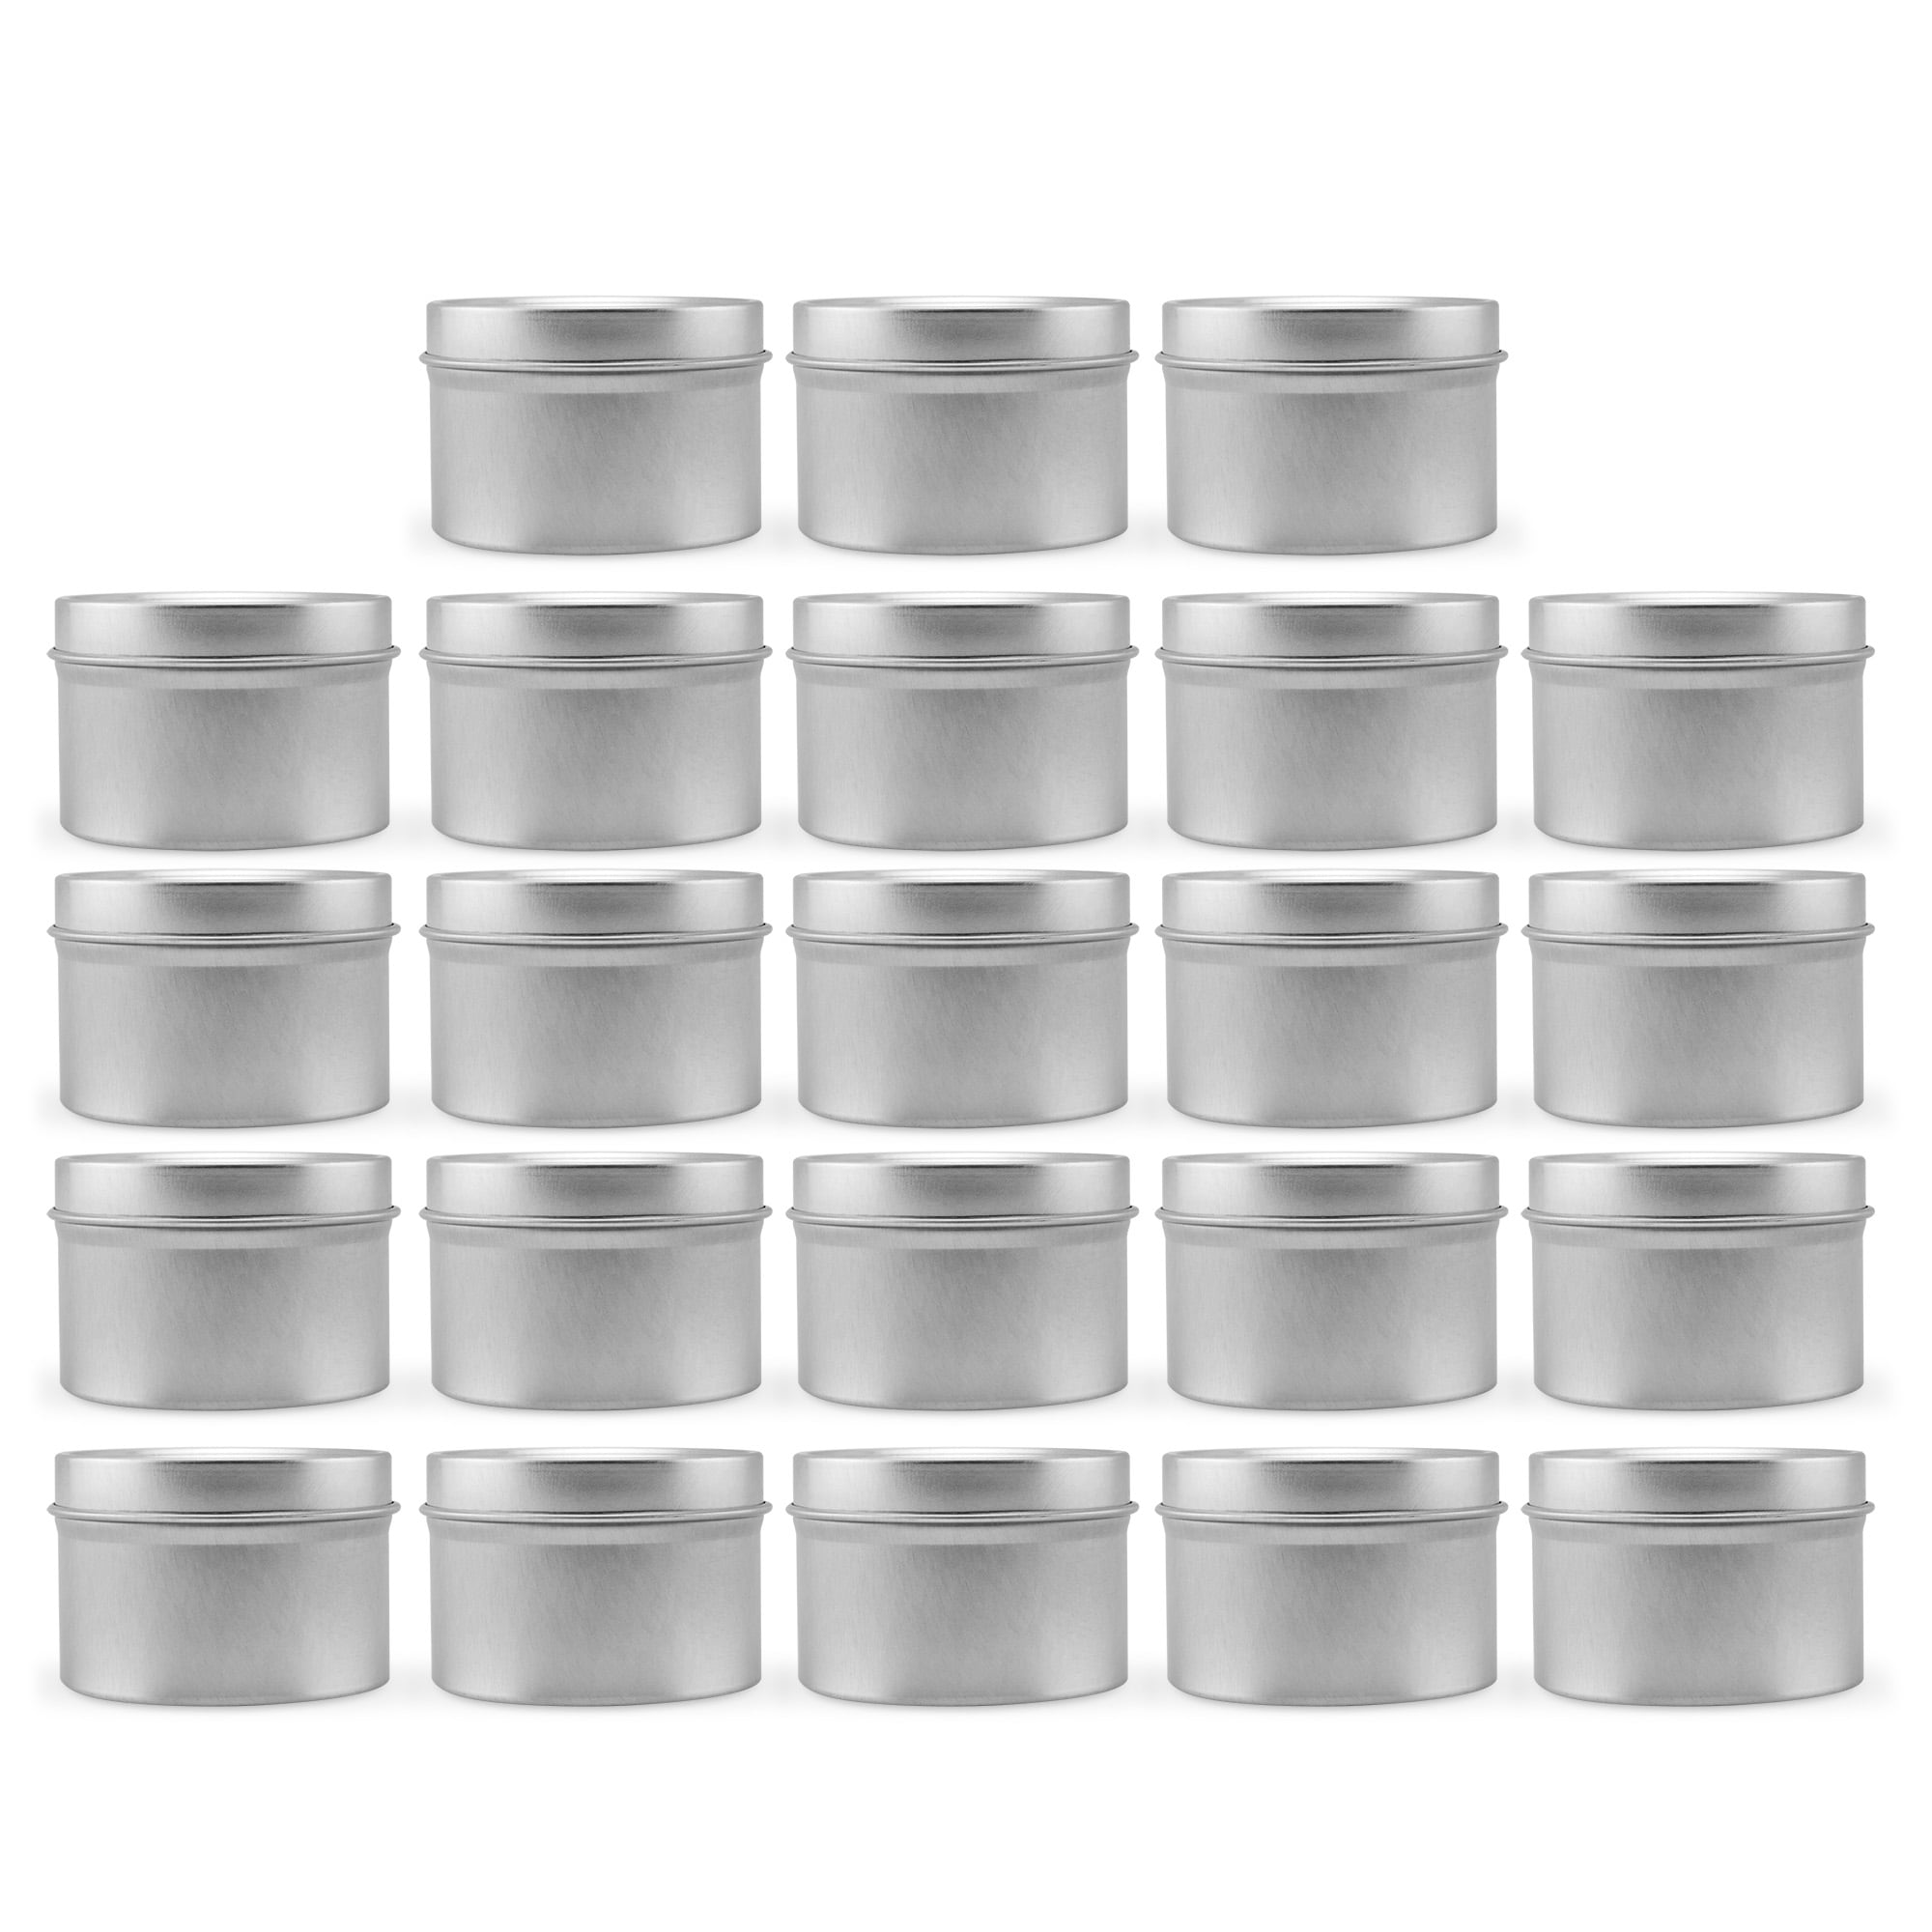 Cornucopia 2oz Metal Tins/Candle Tins (24-Pack); Tiny Round Metal  Containers with Slip-On Lids for Party Favors, Candle Making, Spices & Gifts